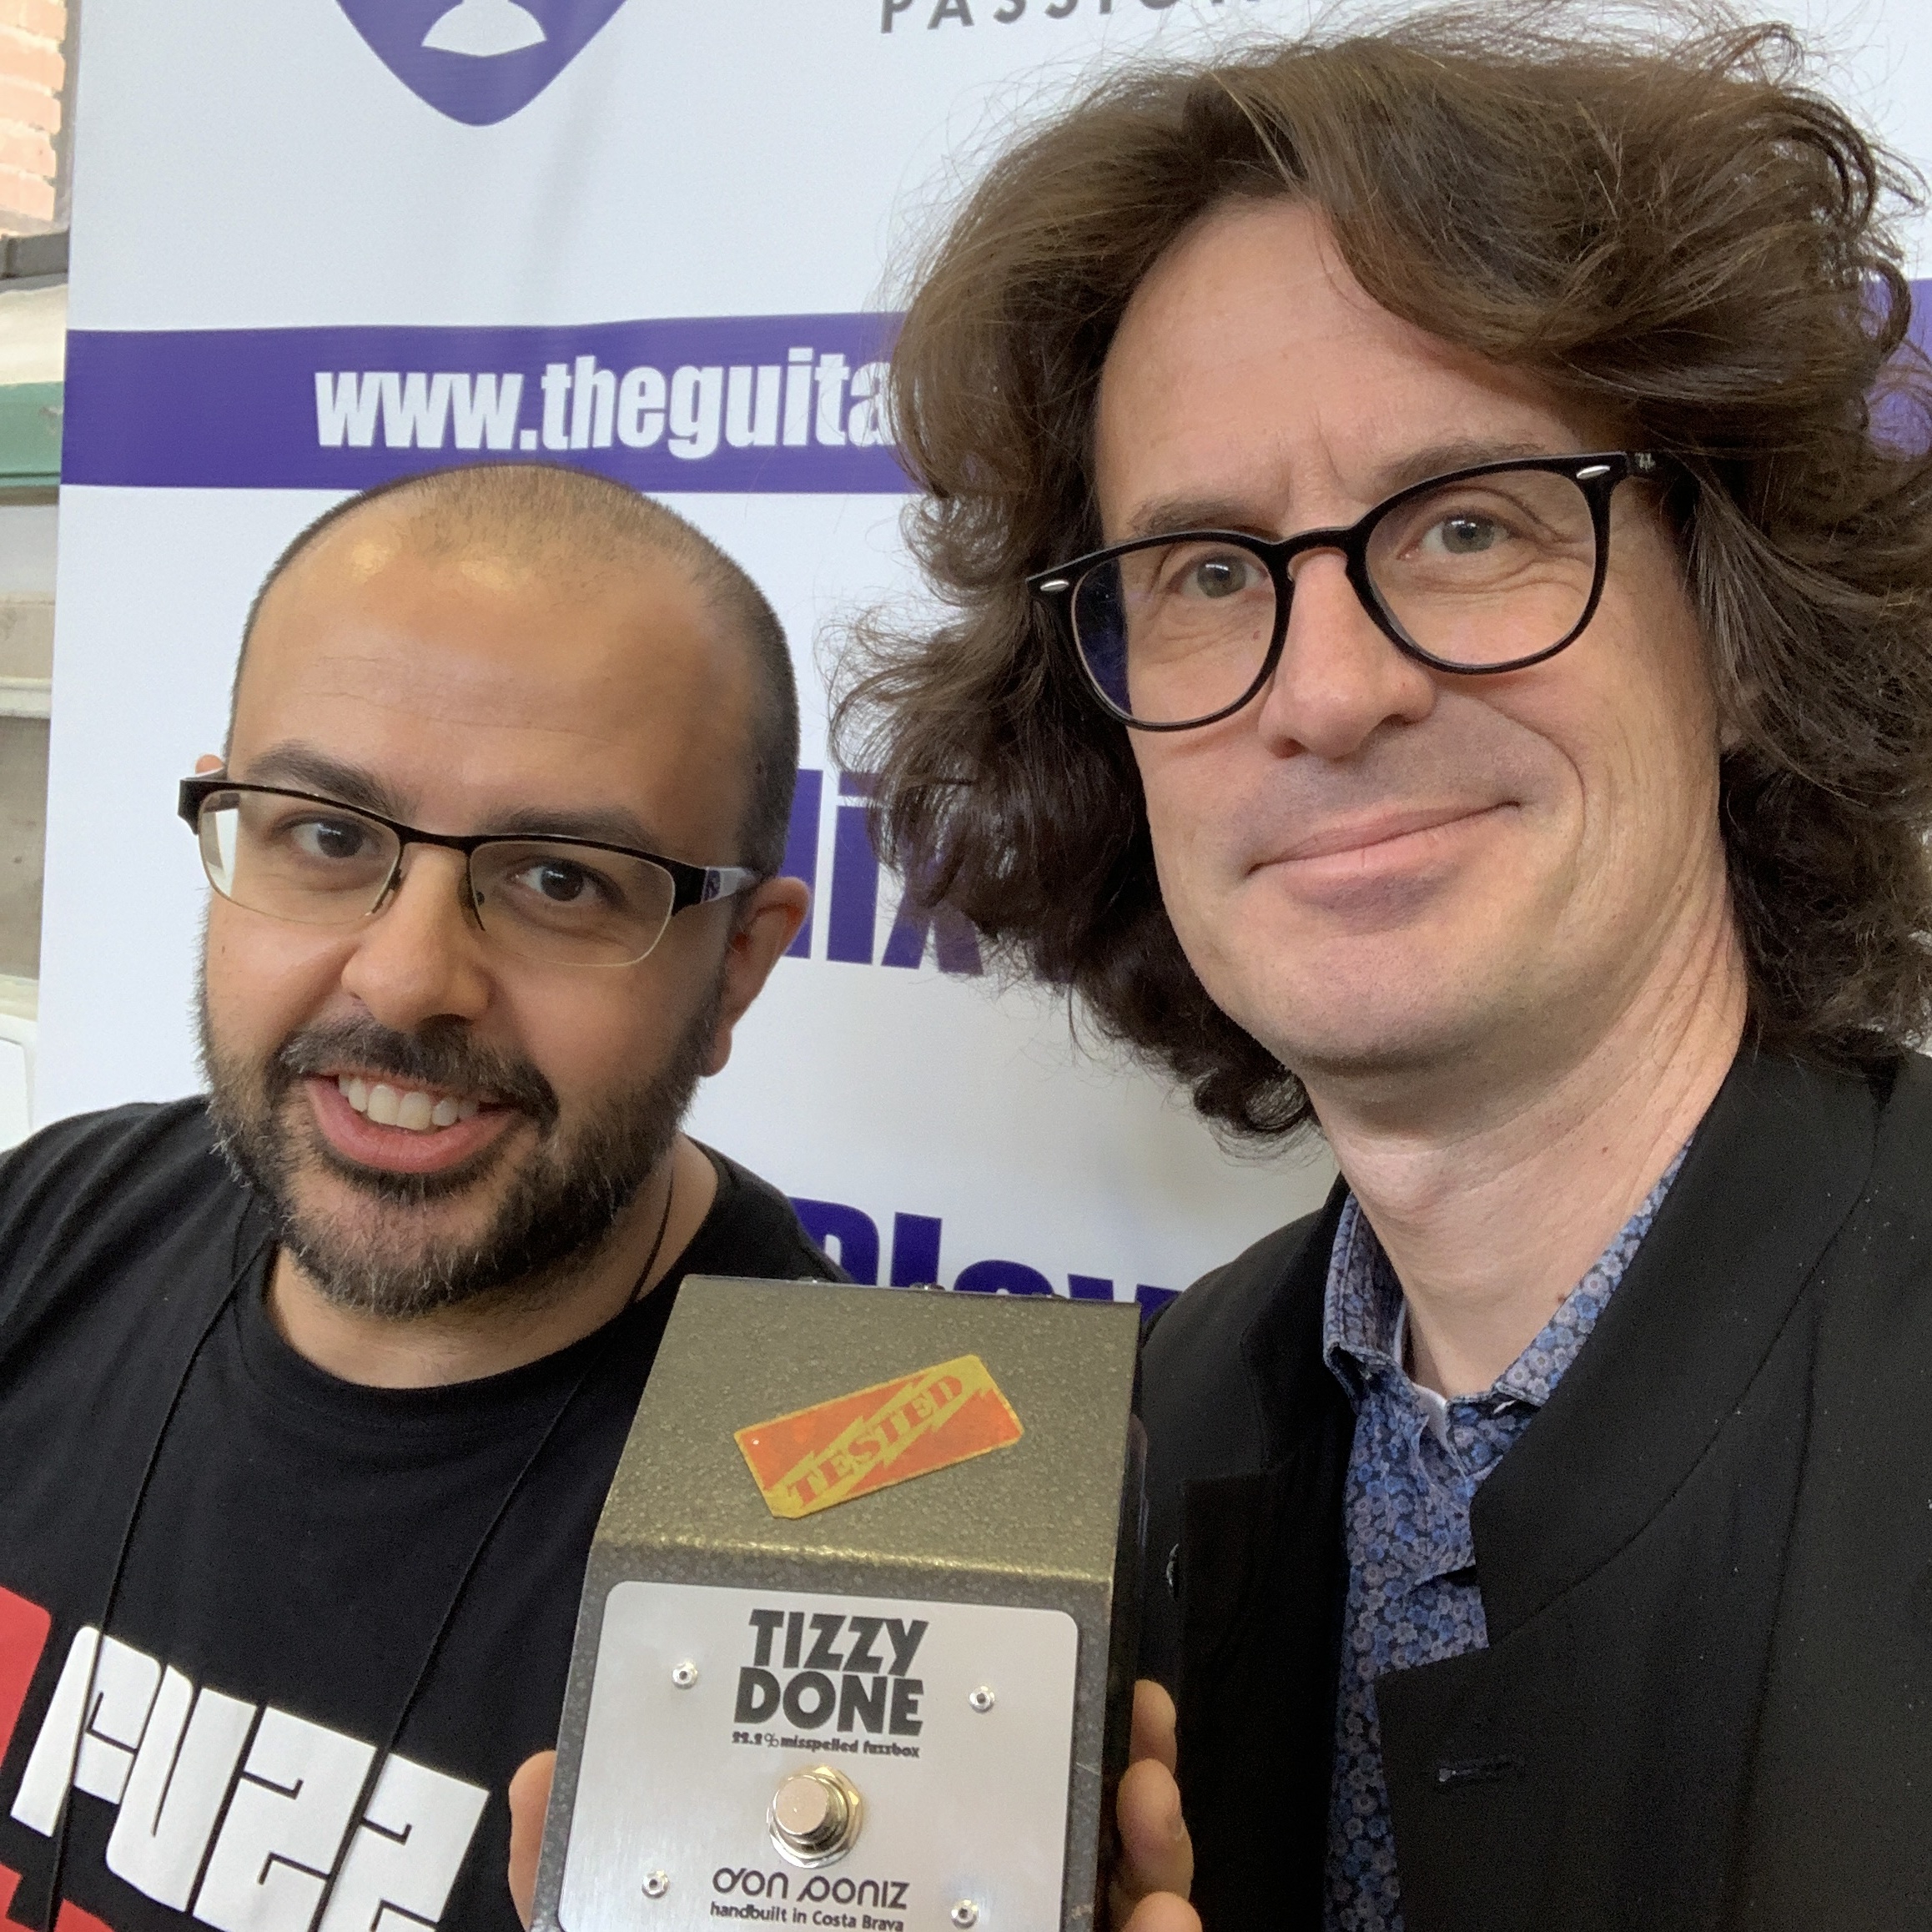 Don Poniz Pedals - Luciano Ponzio pedal builder interview at the Madrid Luthier Guitar Show